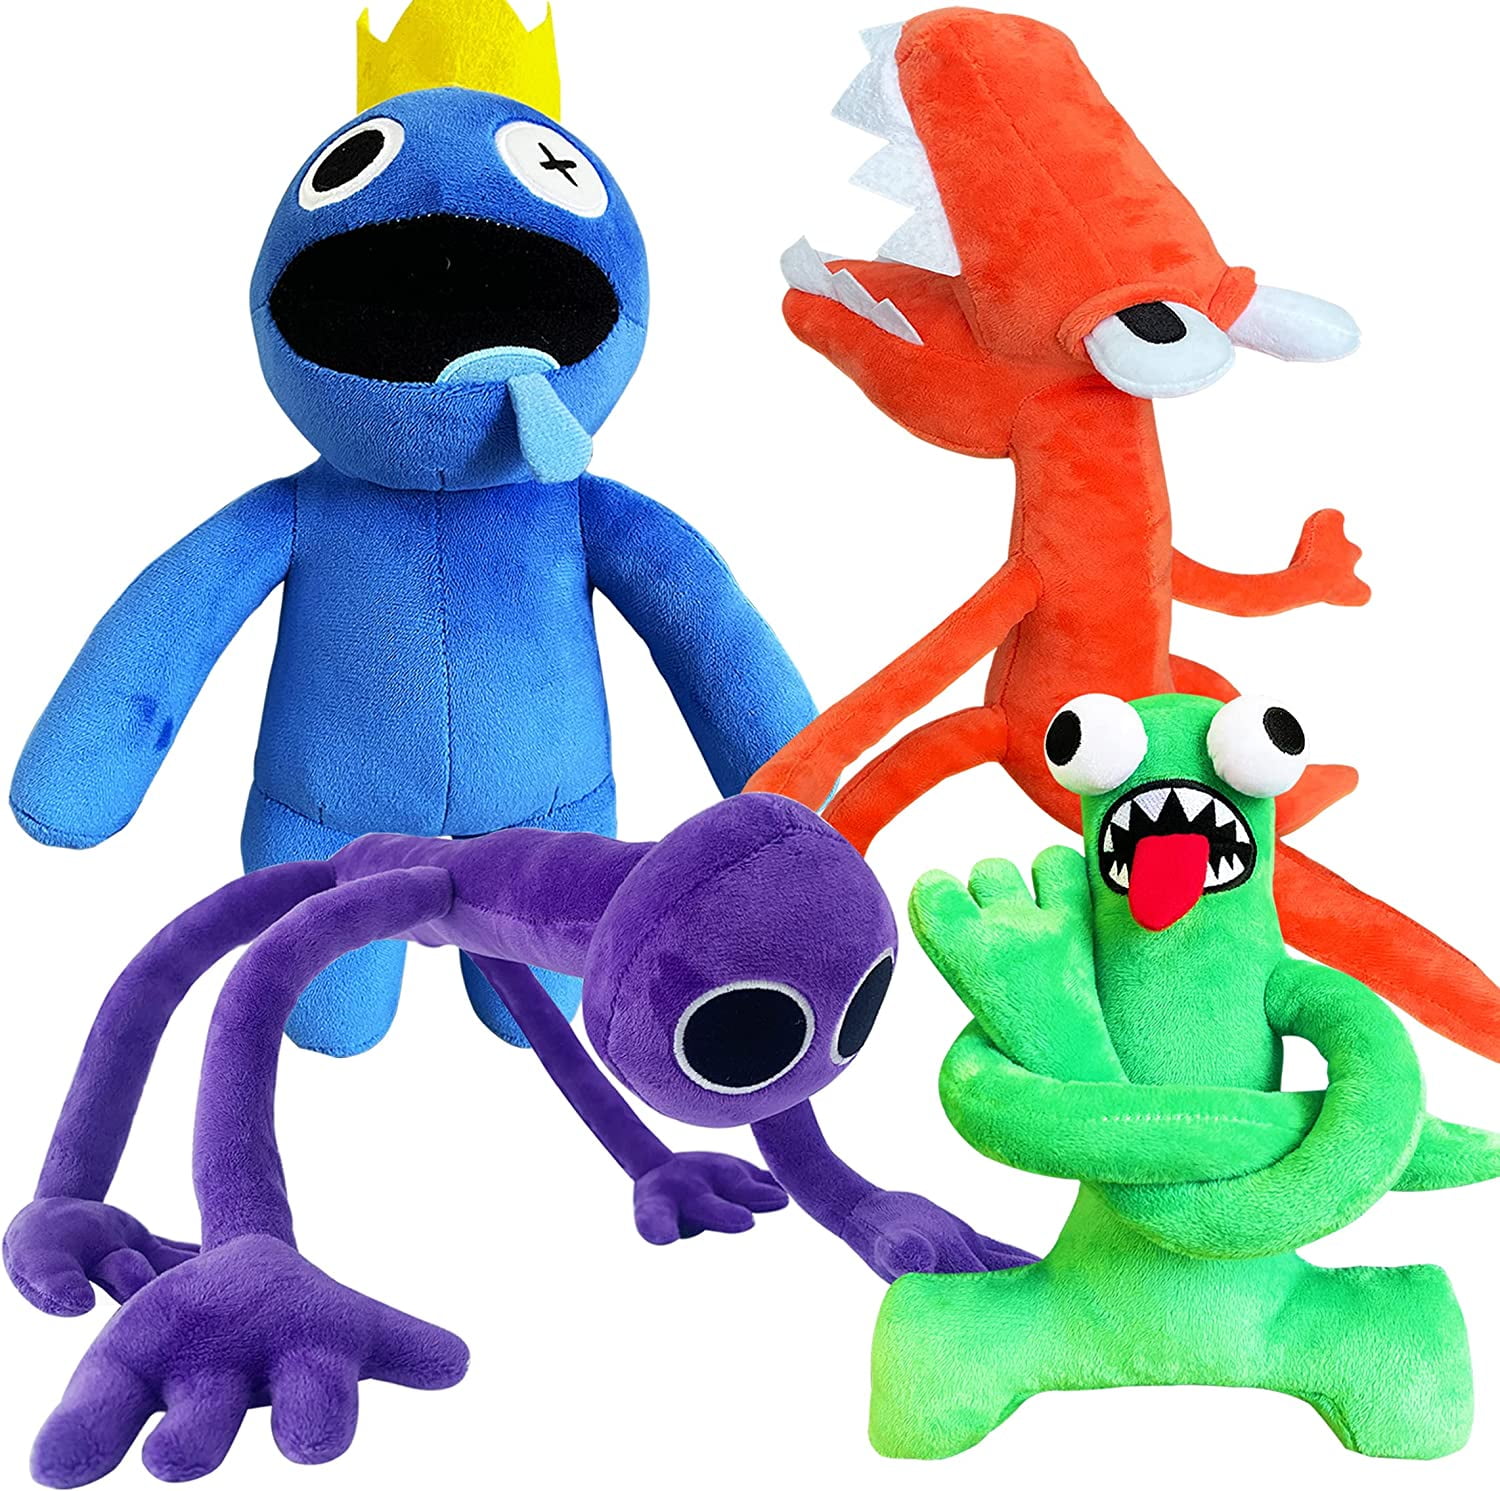 Moira New Horror Game Rainbow Friends Plush, 10-20 Blue Green Pink  Plushies Toy from Rainbow Friends for Fans Gift, Cute Stuffed Figure Doll  for Kids &Adults (Red)